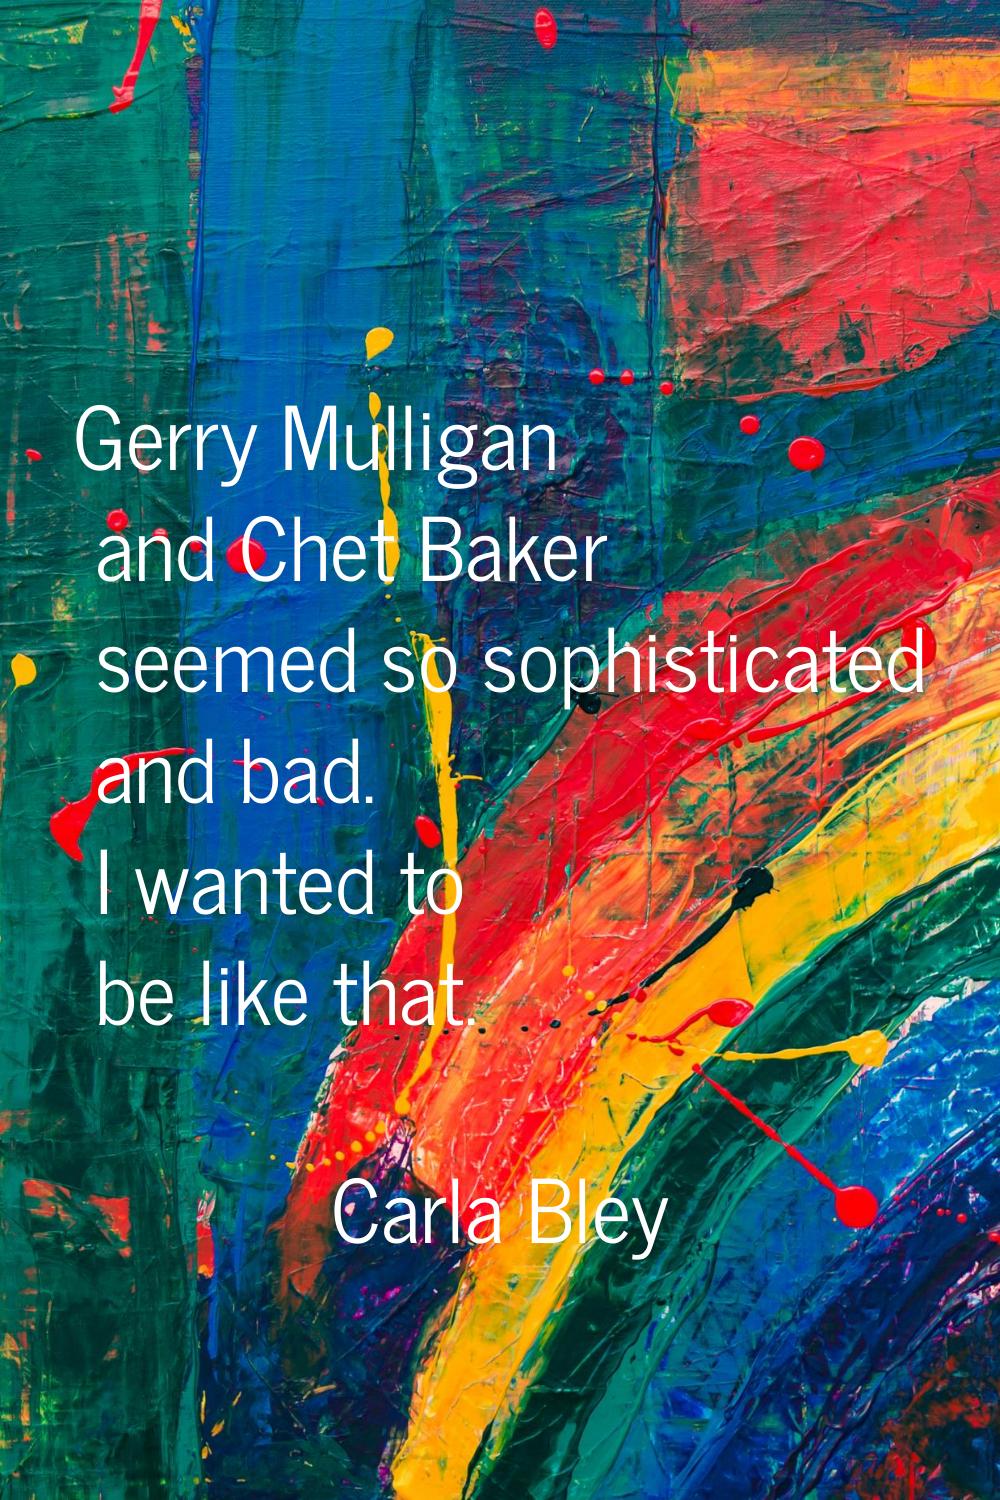 Gerry Mulligan and Chet Baker seemed so sophisticated and bad. I wanted to be like that.